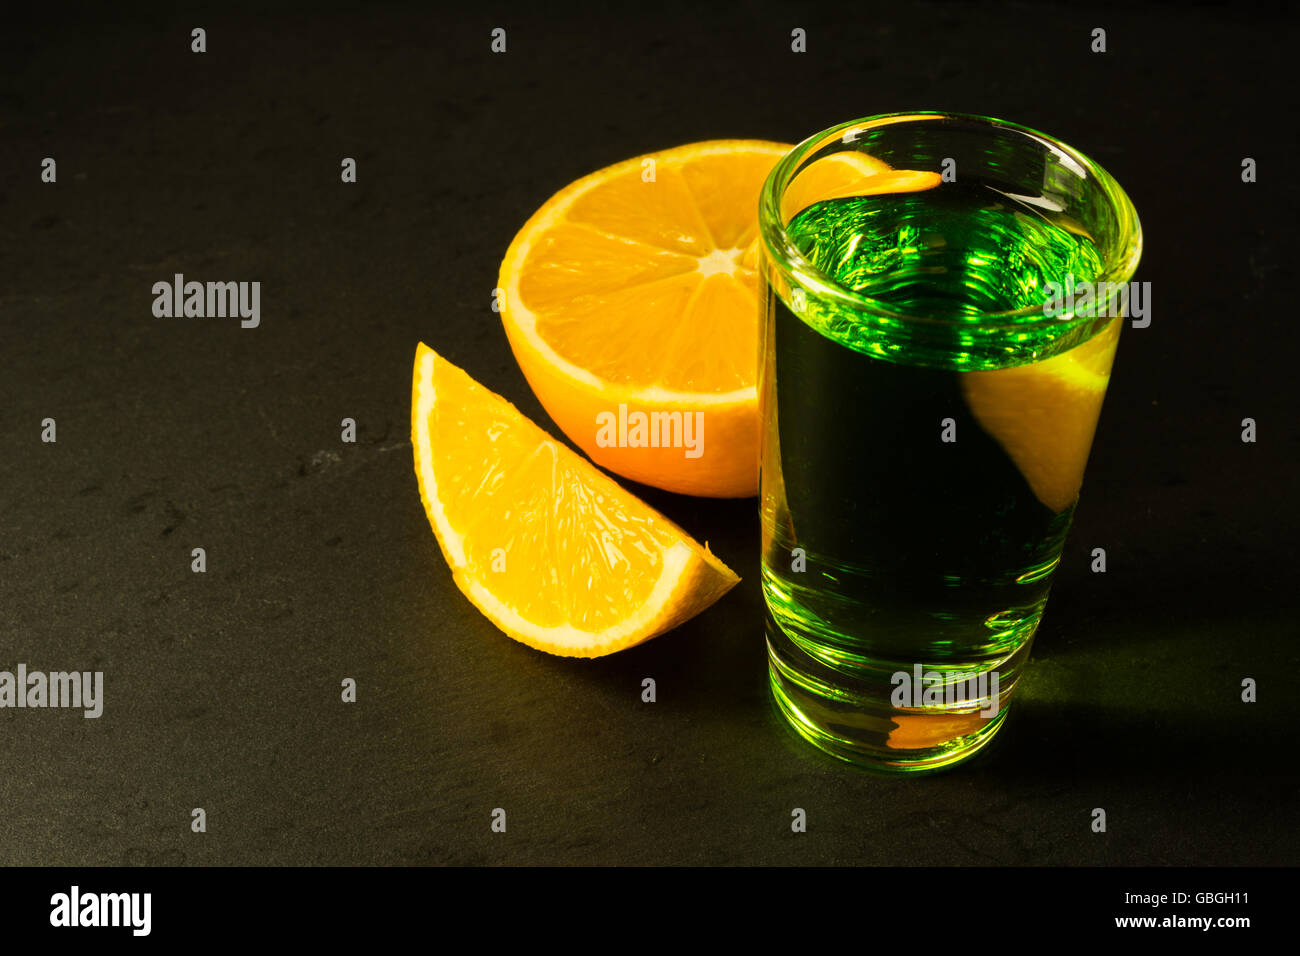 Absinthe on black background. Alcohol drink. Stock Photo